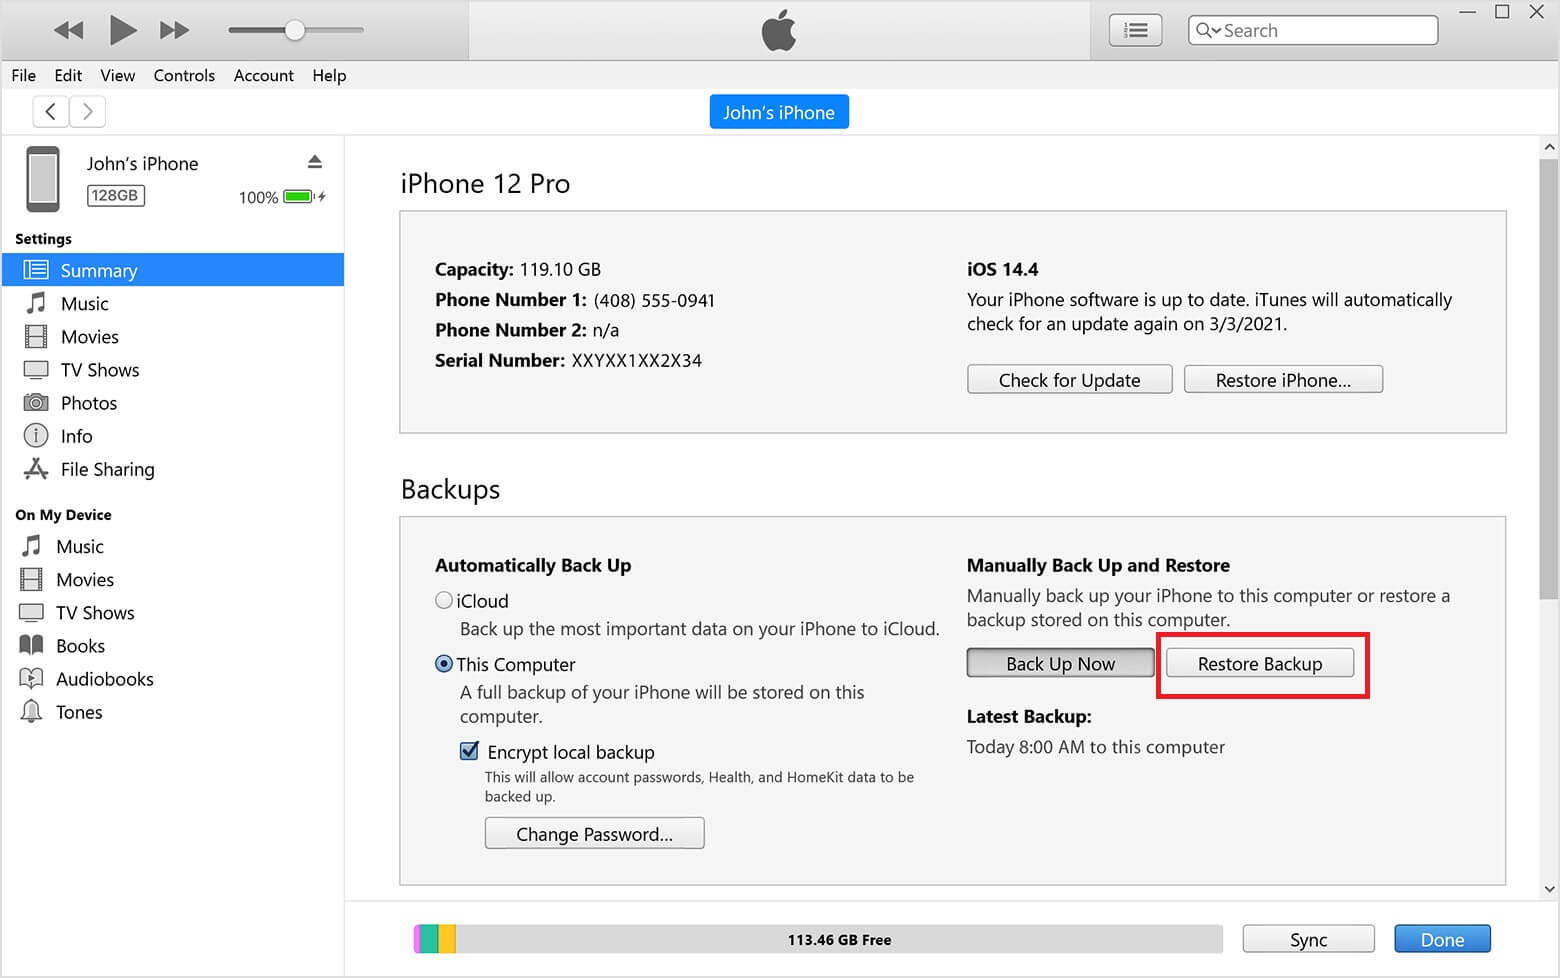  recover  deleted kik messages with iTunes backup 